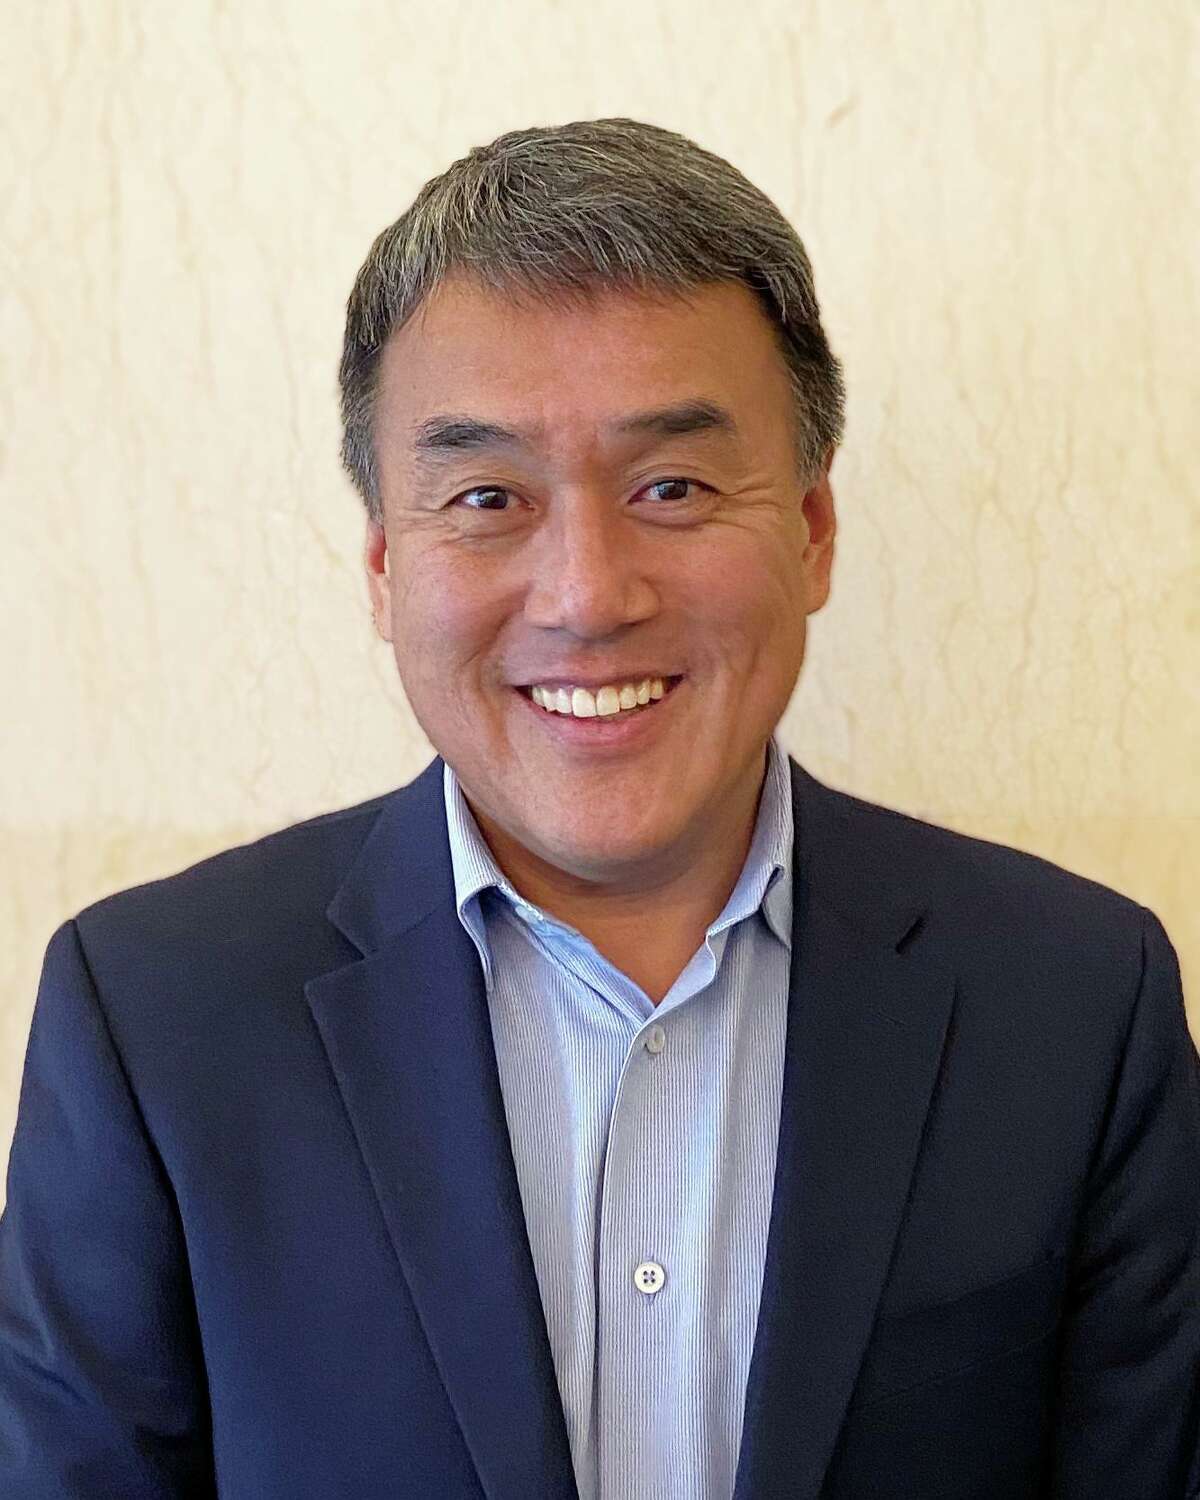 Bernie Han, named CEO of Frontier Communications in December 2019. (Photo via Businesswire)